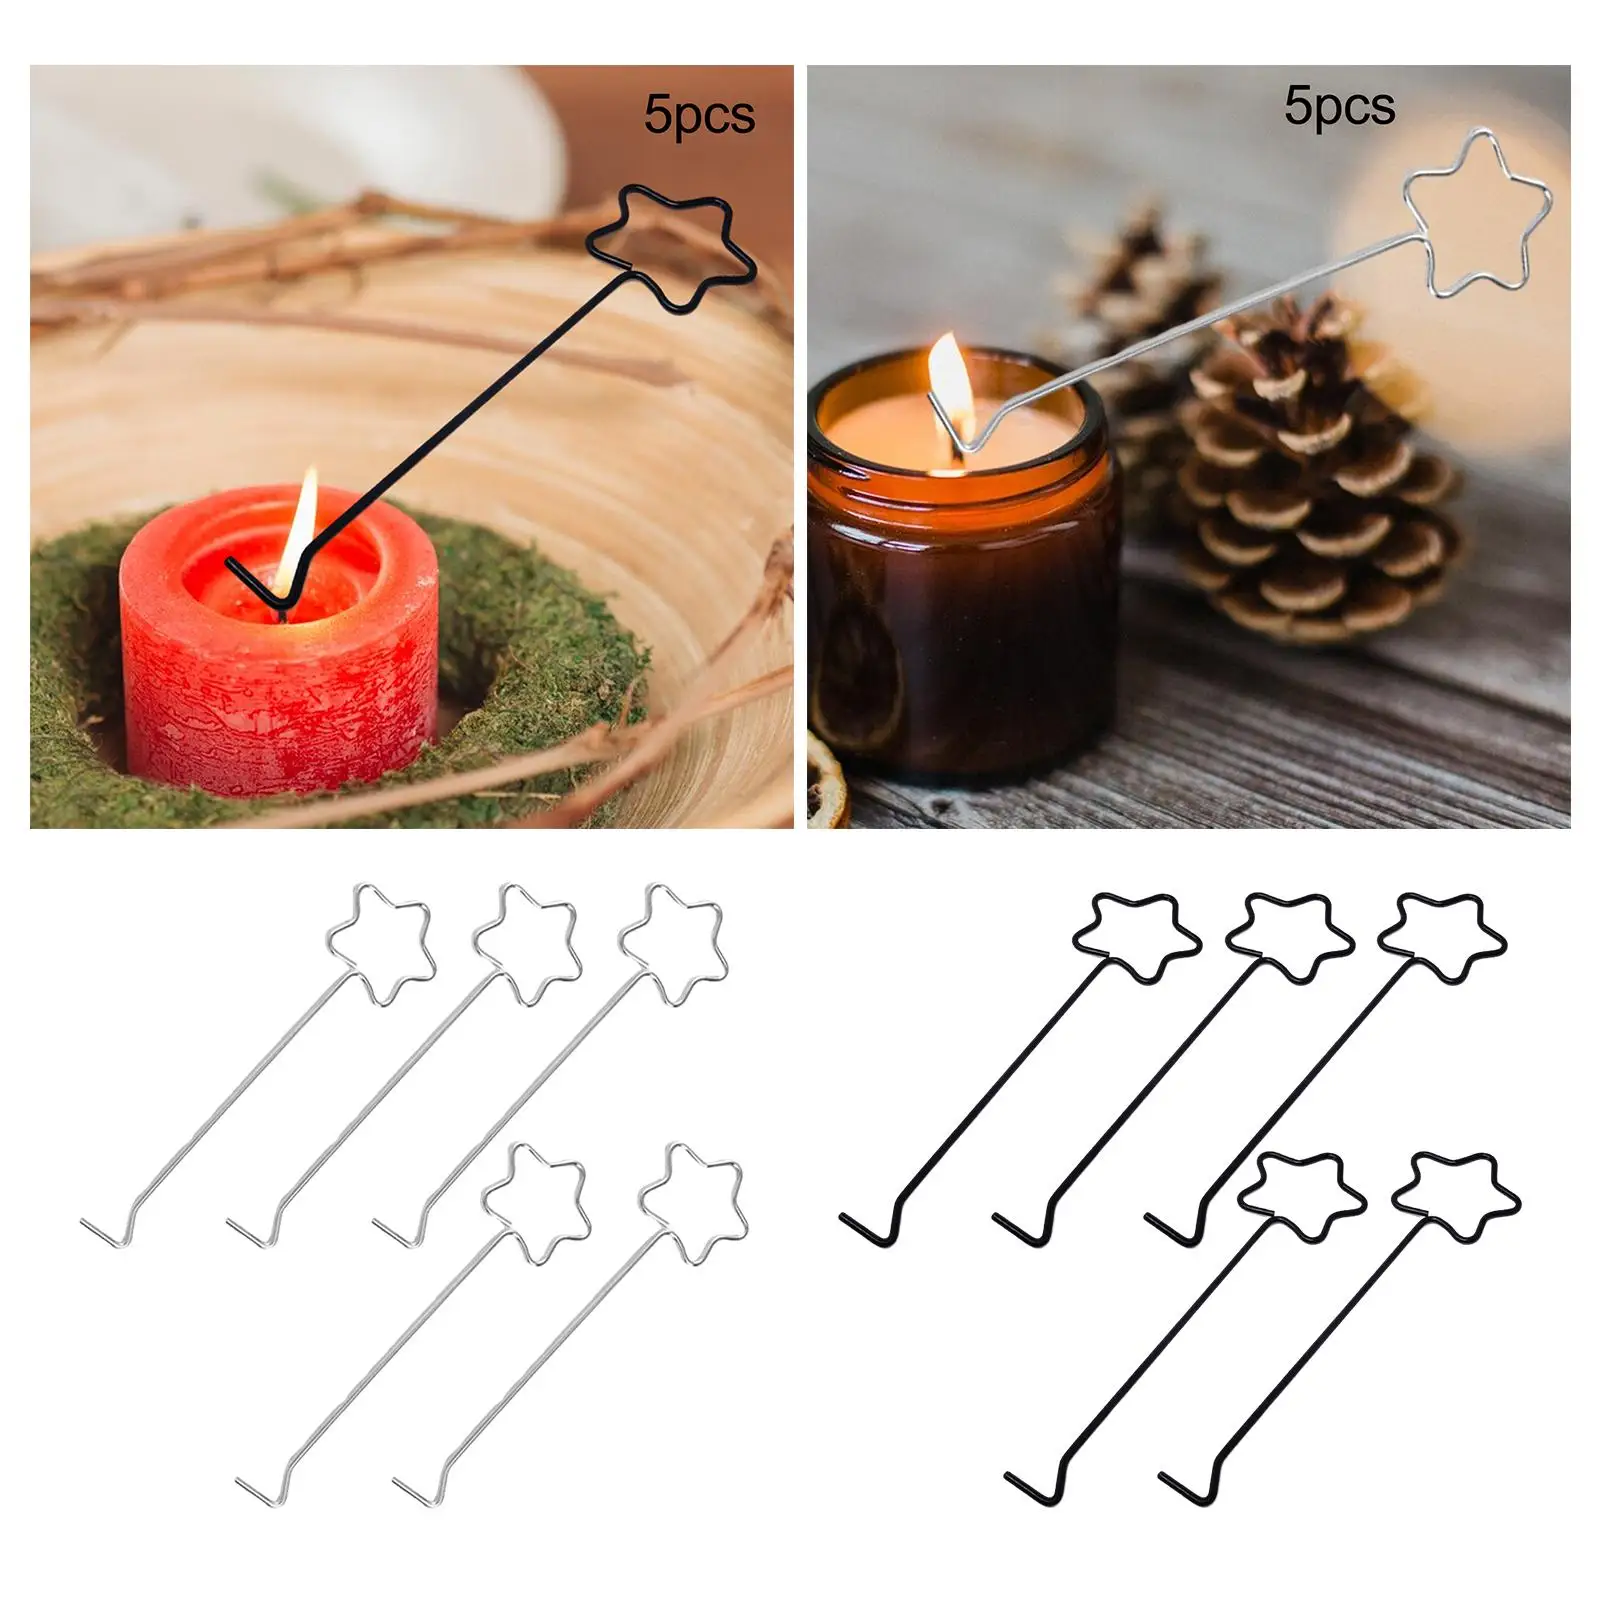 5Pcs Candle Wick Dippers Stainless Steel Premium Lightweight Cutter for Candle Lovers Gift Candle Care Wedding Candle Making